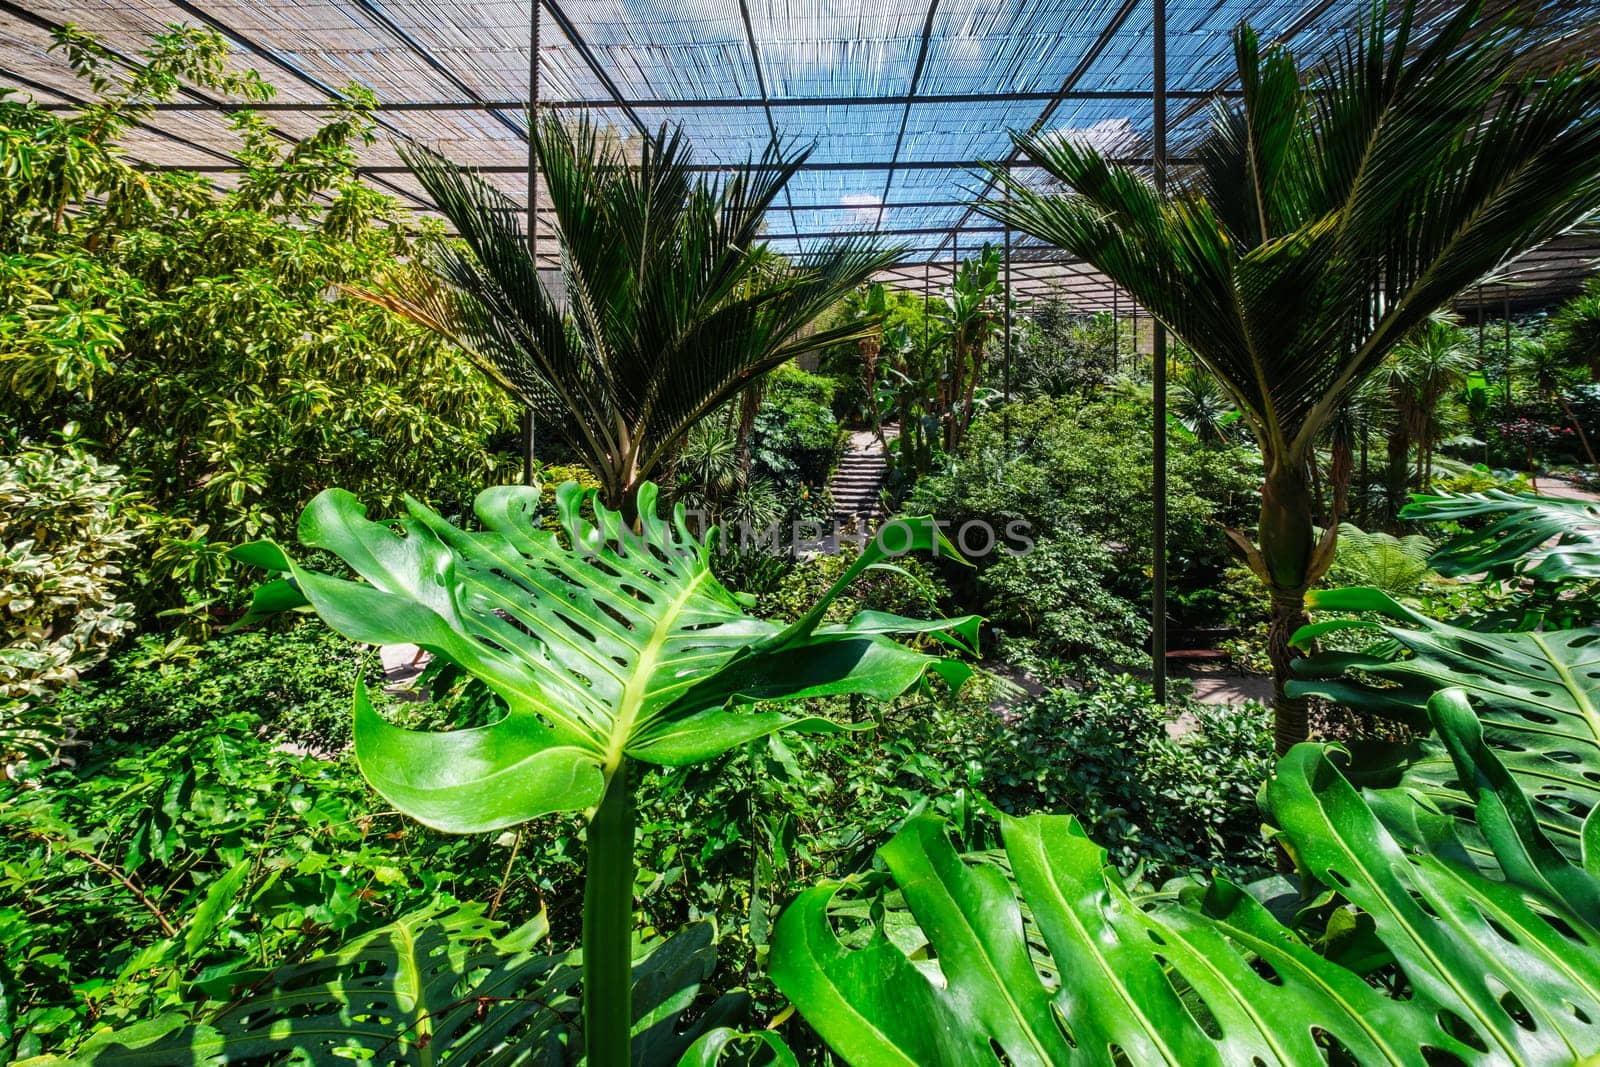 Interior view of the cold house Estufa Fria is a greenhouse with gardens, ponds, plants and trees with Monstera deliciosa leaves in the foreground in Lisbon, Portugal